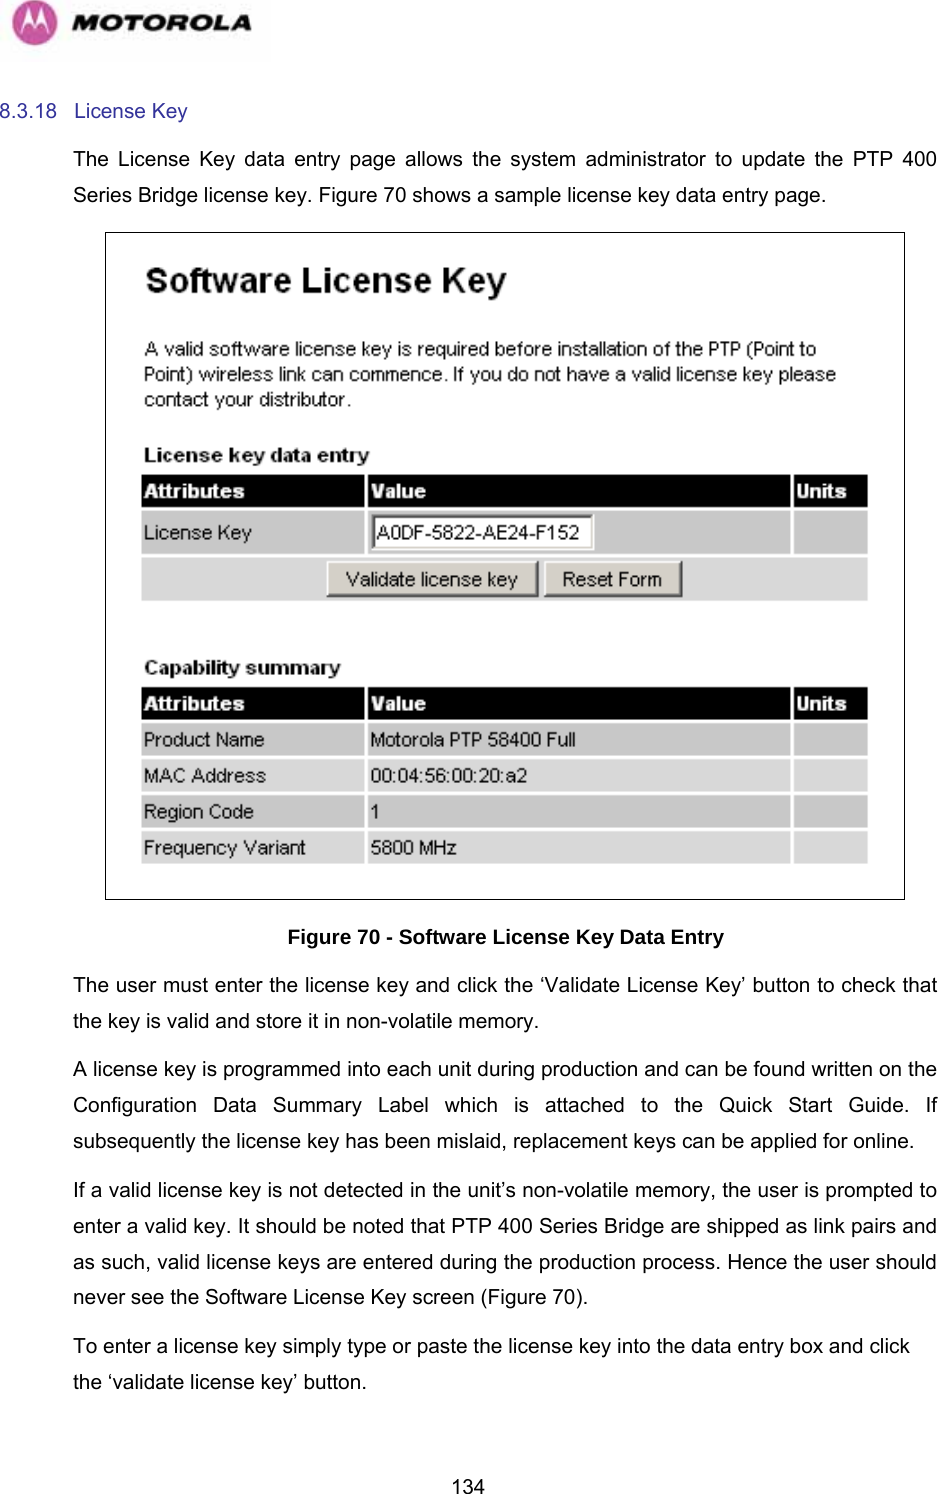   1348.3.18 License Key The License Key data entry page allows the system administrator to update the PTP 400 Series Bridge license key. Figure 70 shows a sample license key data entry page.  Figure 70 - Software License Key Data Entry The user must enter the license key and click the ‘Validate License Key’ button to check that the key is valid and store it in non-volatile memory. A license key is programmed into each unit during production and can be found written on the Configuration Data Summary Label which is attached to the Quick Start Guide. If subsequently the license key has been mislaid, replacement keys can be applied for online. If a valid license key is not detected in the unit’s non-volatile memory, the user is prompted to enter a valid key. It should be noted that PTP 400 Series Bridge are shipped as link pairs and as such, valid license keys are entered during the production process. Hence the user should never see the Software License Key screen (Figure 70). To enter a license key simply type or paste the license key into the data entry box and click the ‘validate license key’ button. 